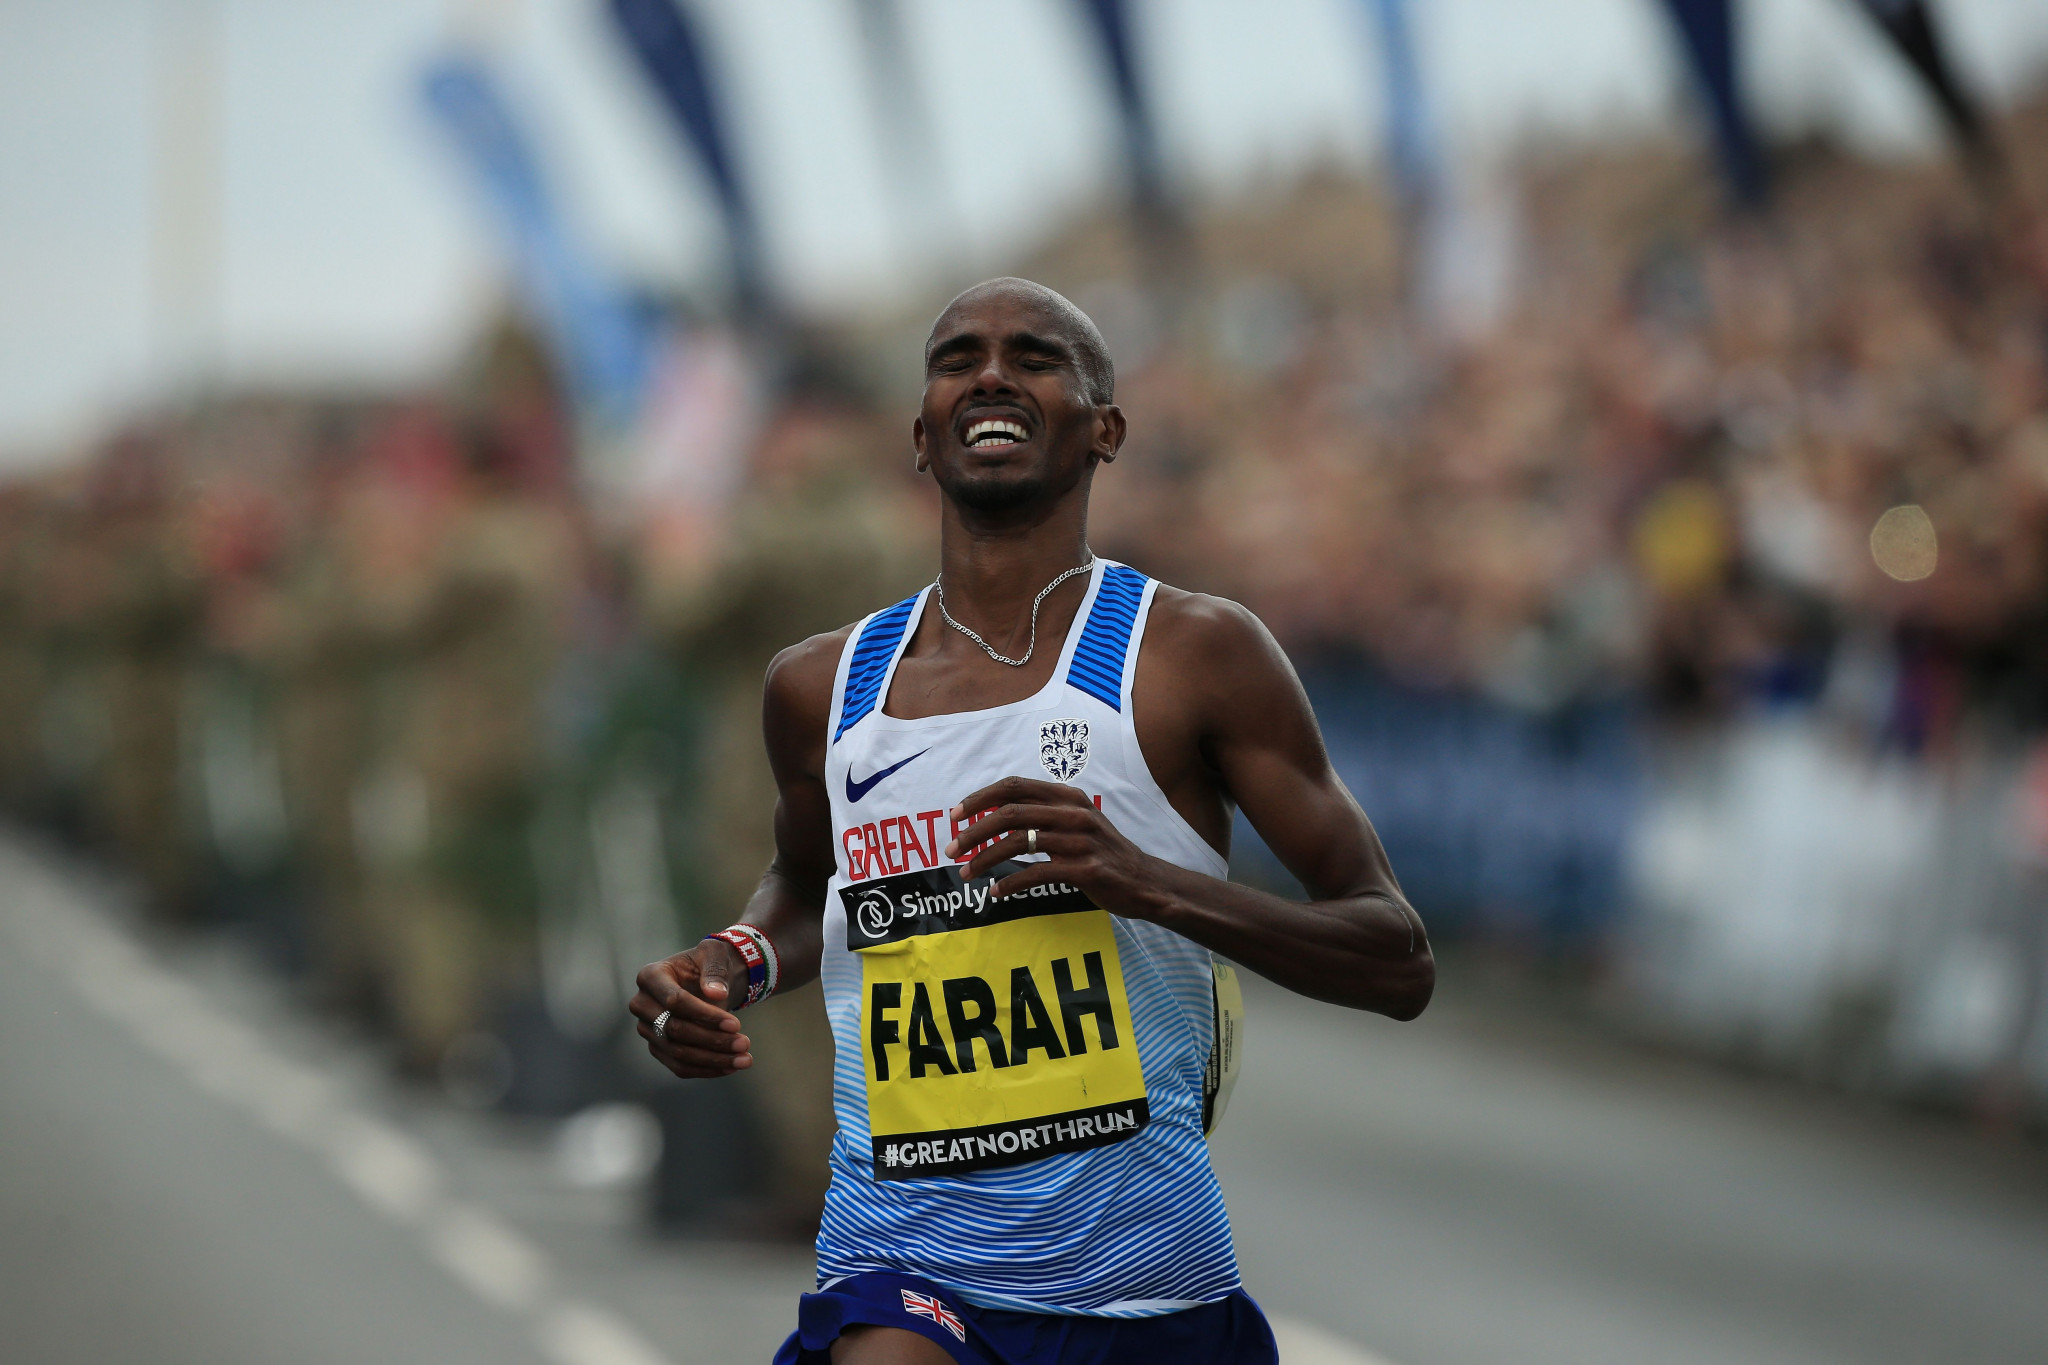 Mo Farah will no longer be trained by controversial coach Alberto Salazar ©Getty Images